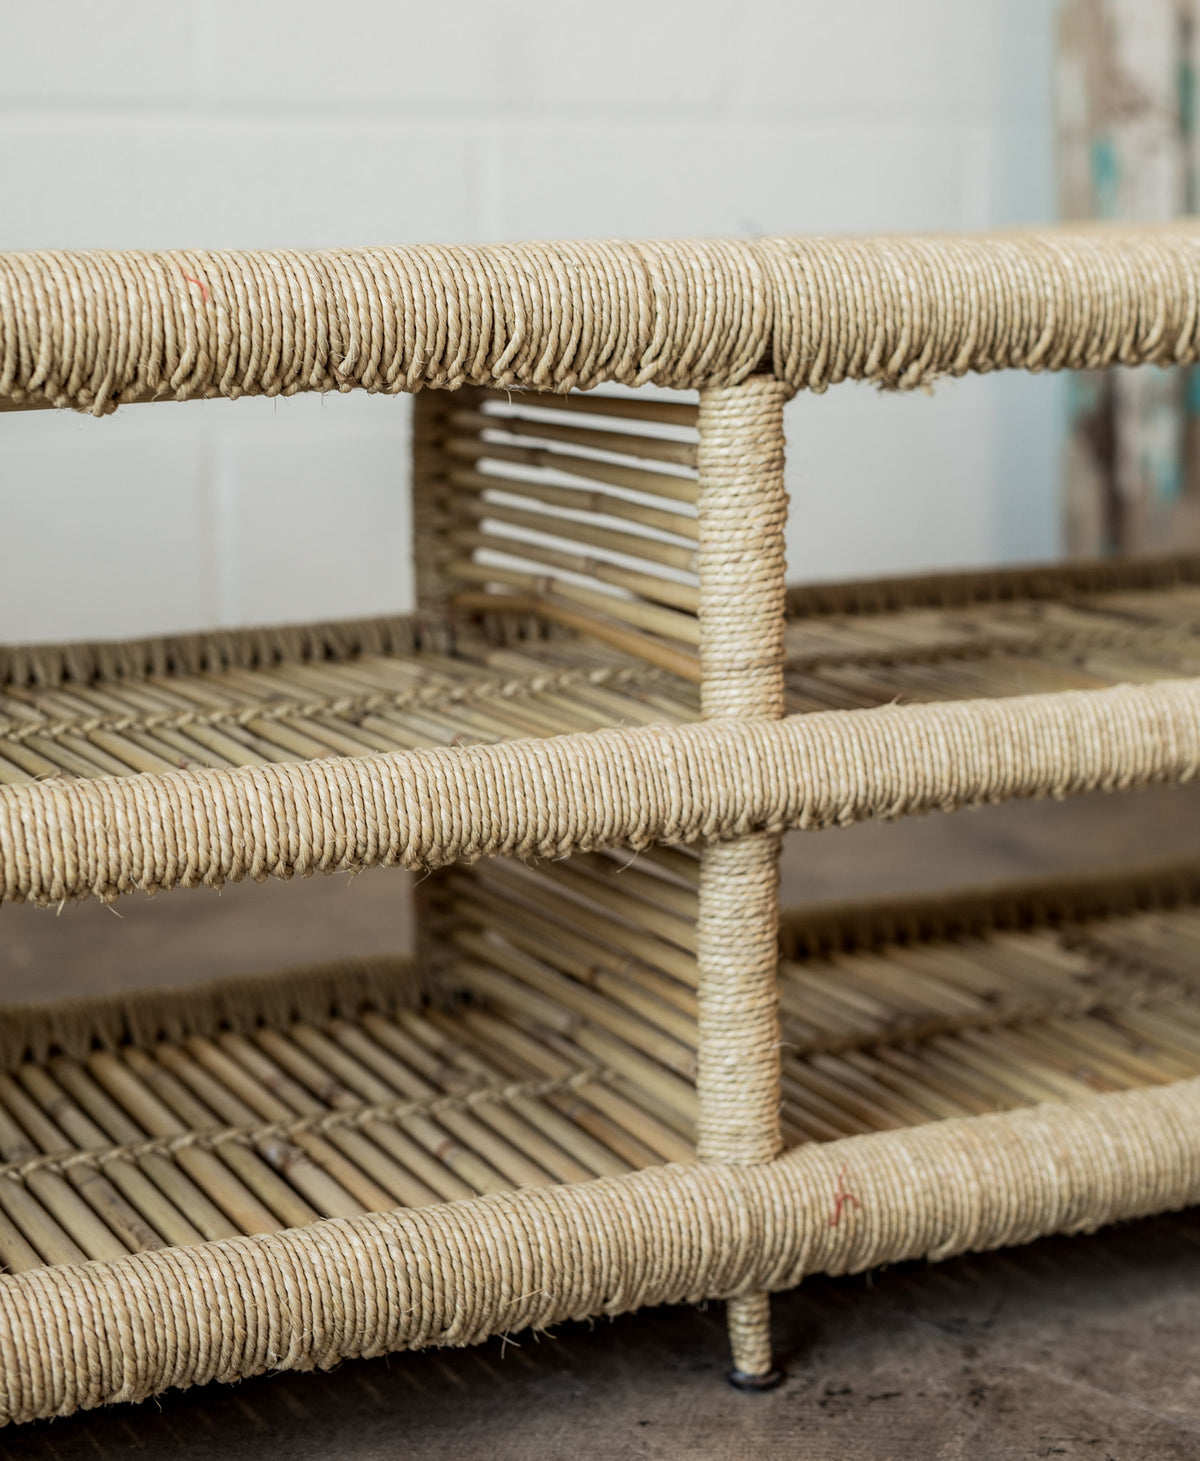 Handwoven Bamboo & Jute Table or Bench